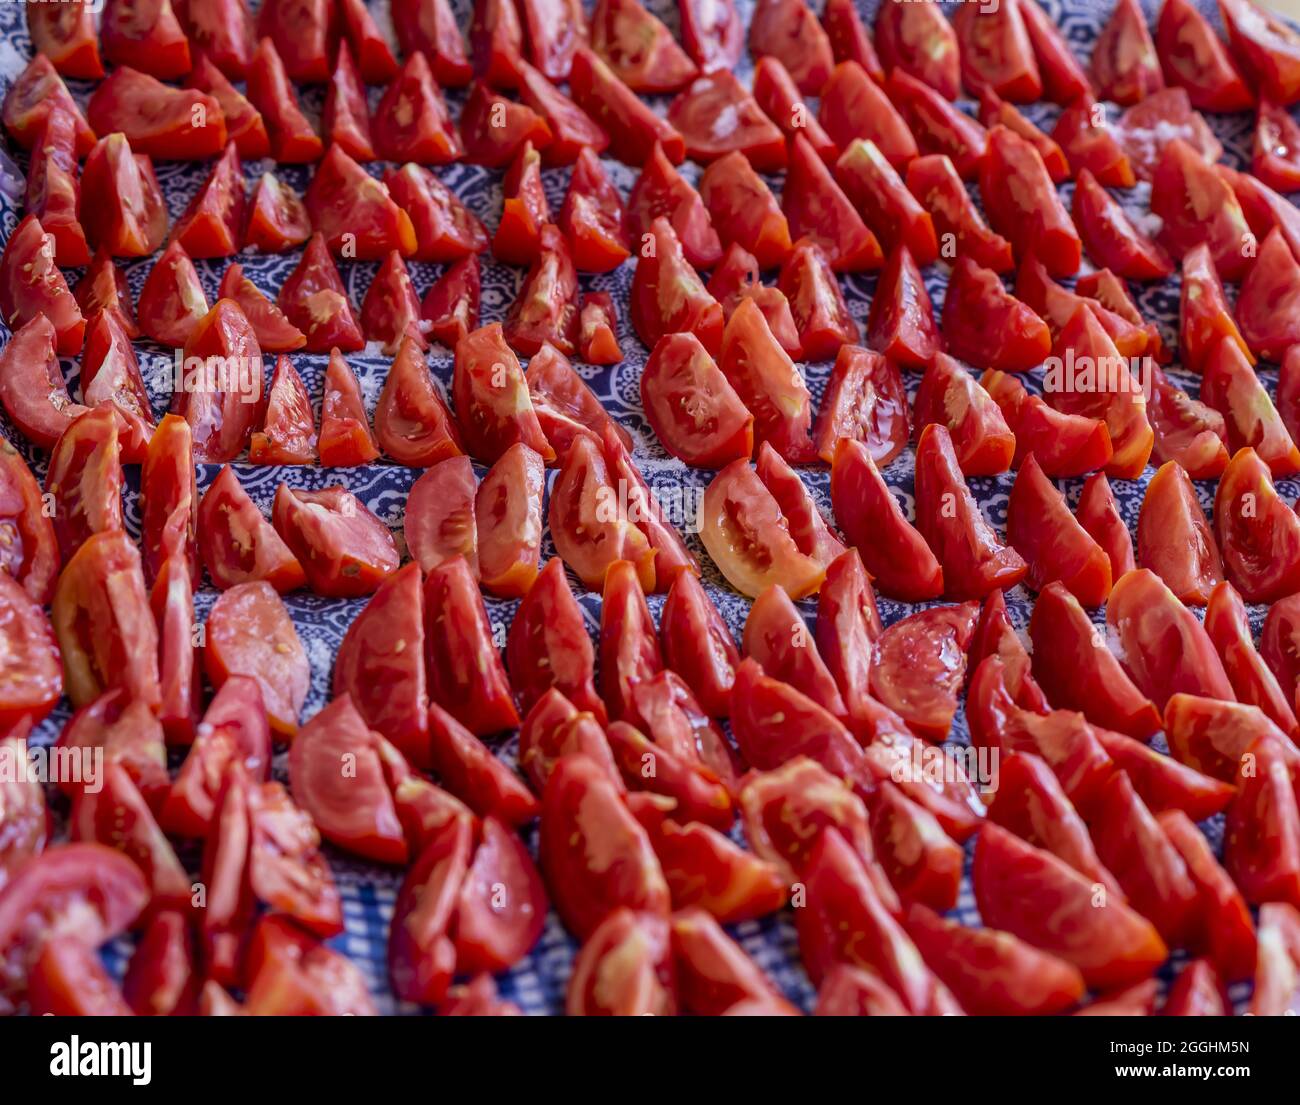 Dried tomato halves, top view, different shapes and sizes Stock Photo